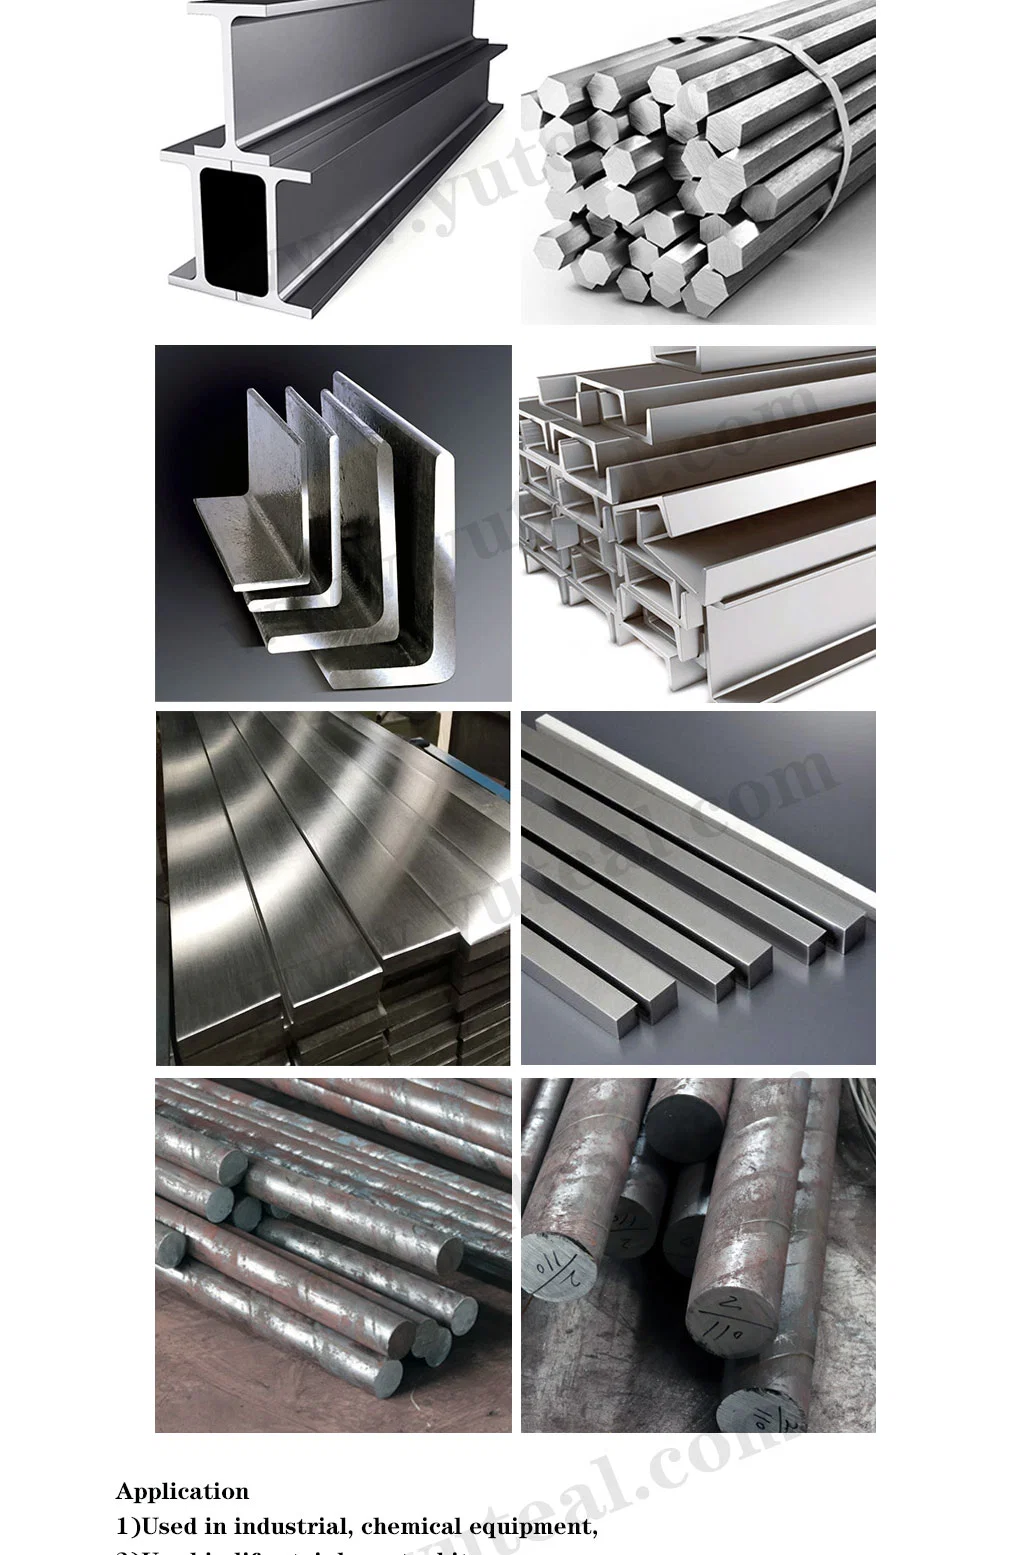 High Quality Stainless Steel 1cr17ni7 12cr17ni7 S30409 SUS301 301 Round Bar Manufacturer, Stainless Steel Round Bar